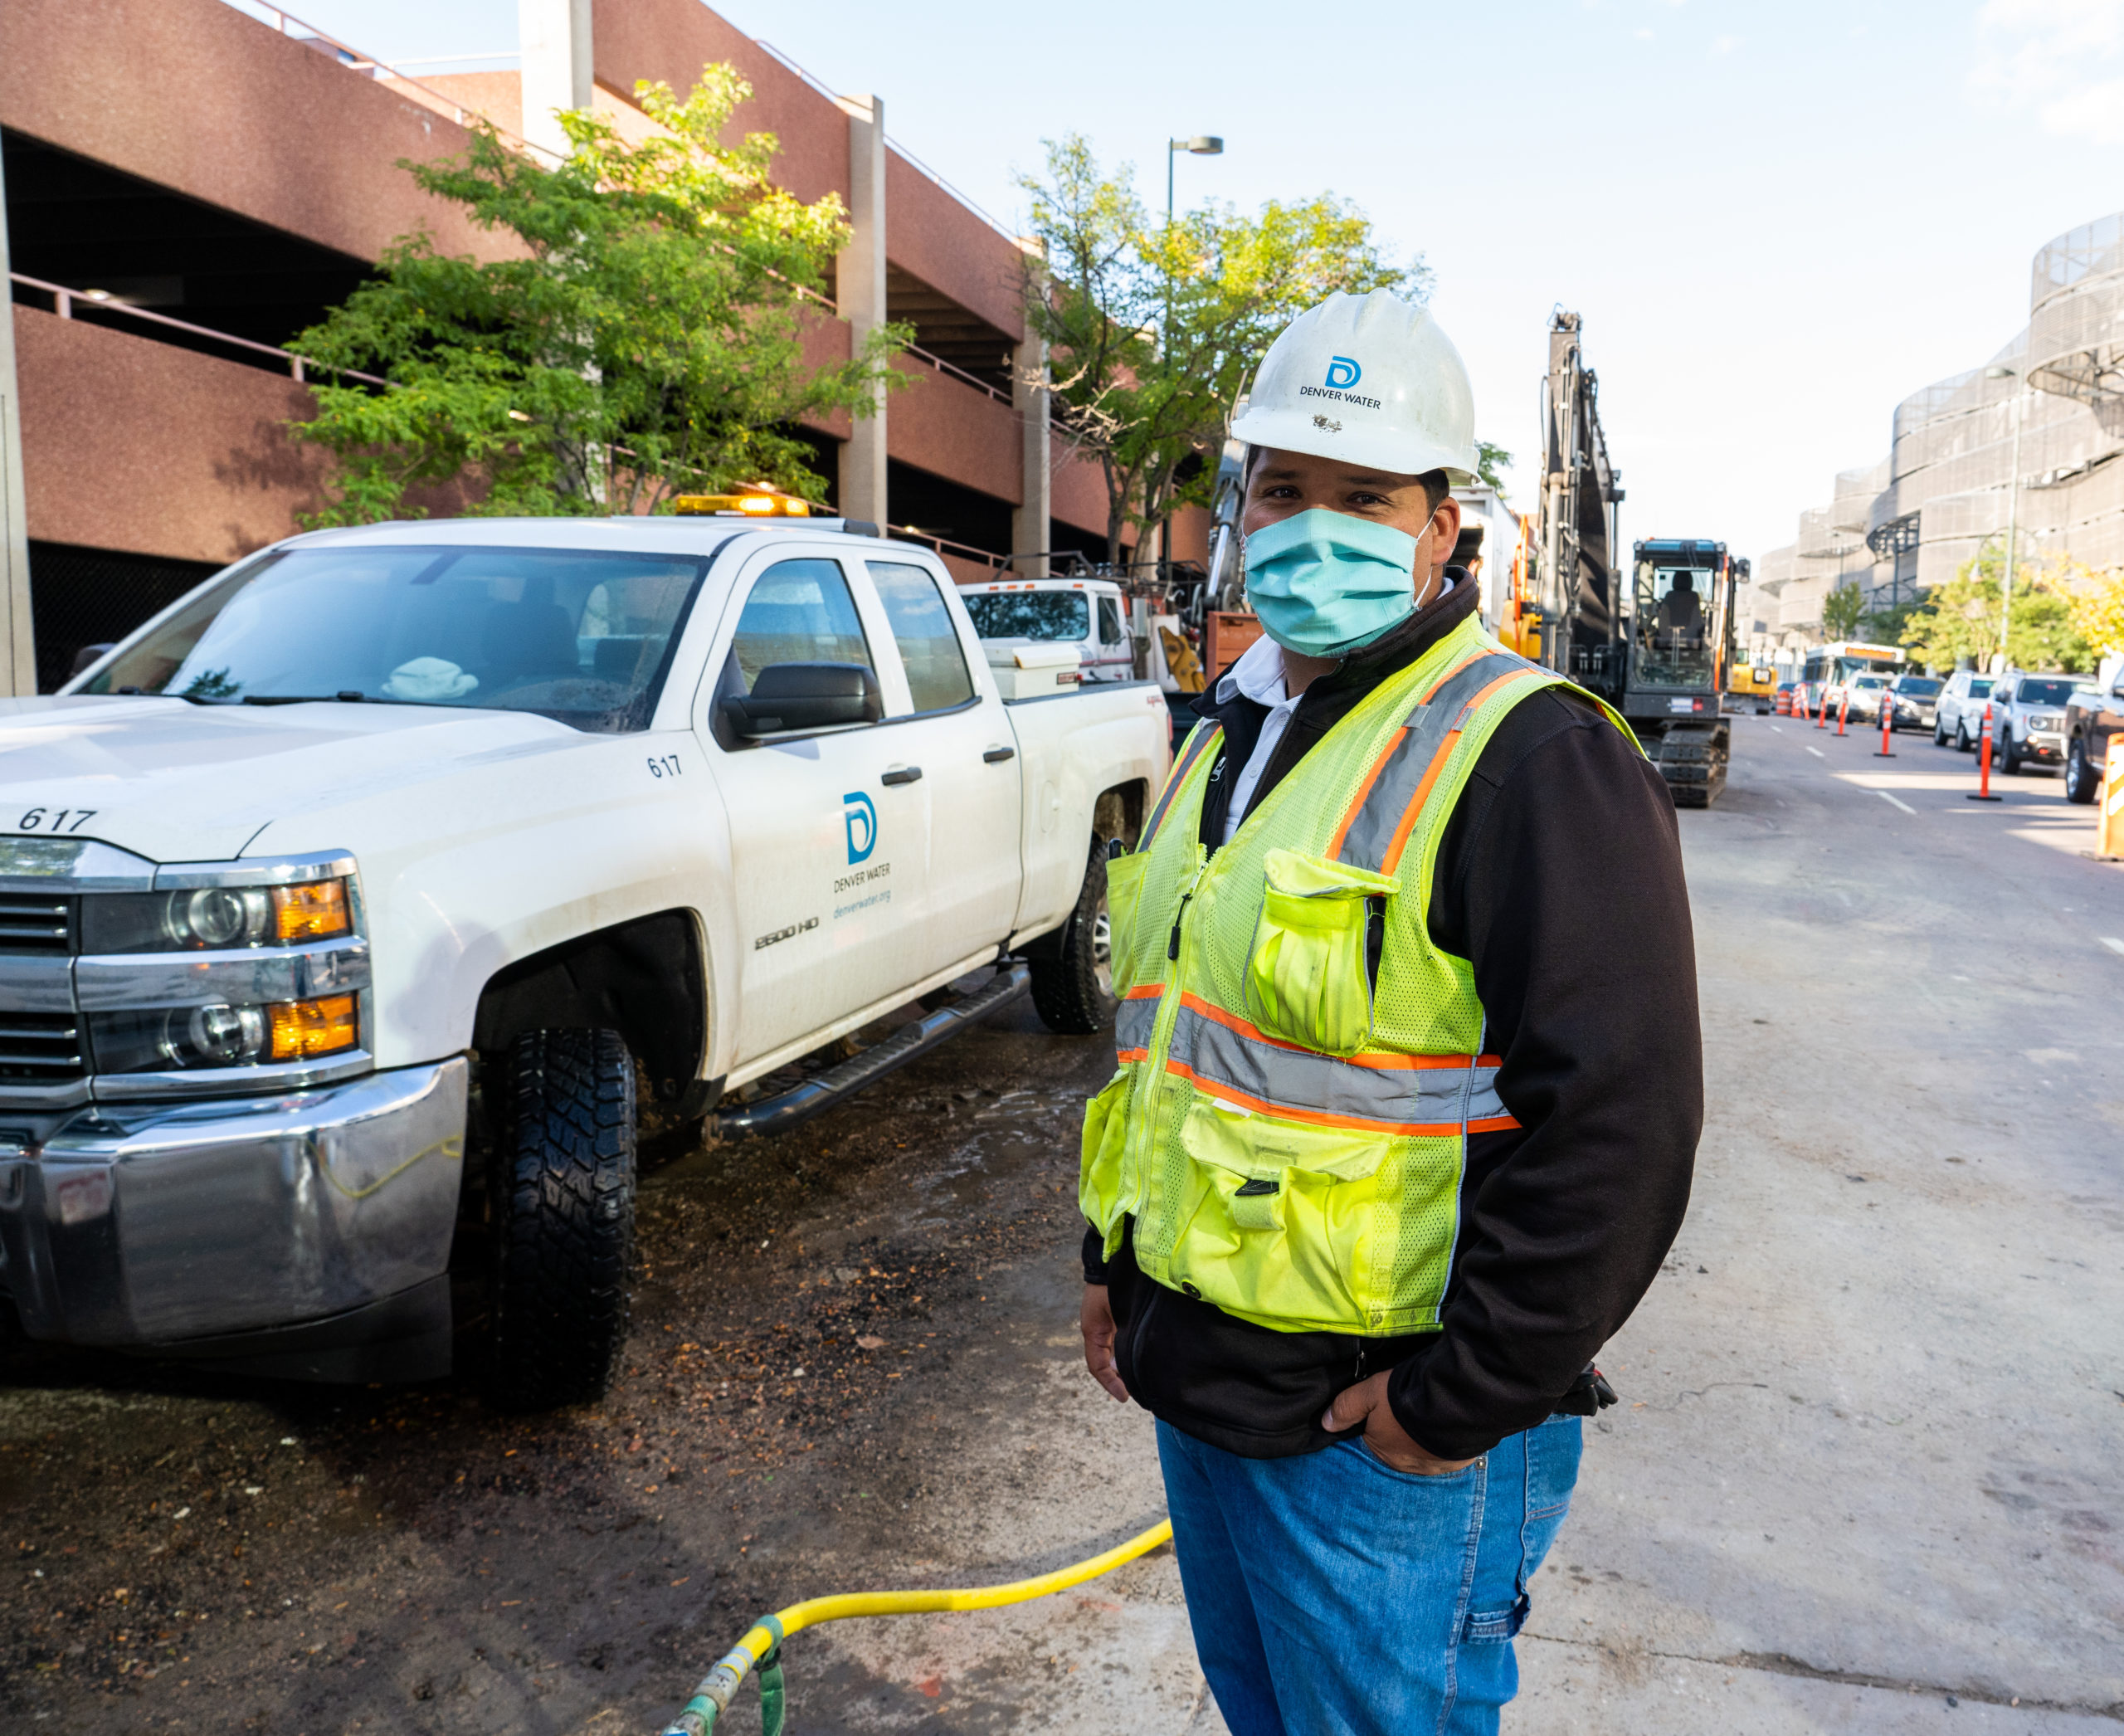 Denver Water employees began wearing masks on the job starting in March 2020 due to the COVID-19 pandemic. Photo credit: Denver Water.